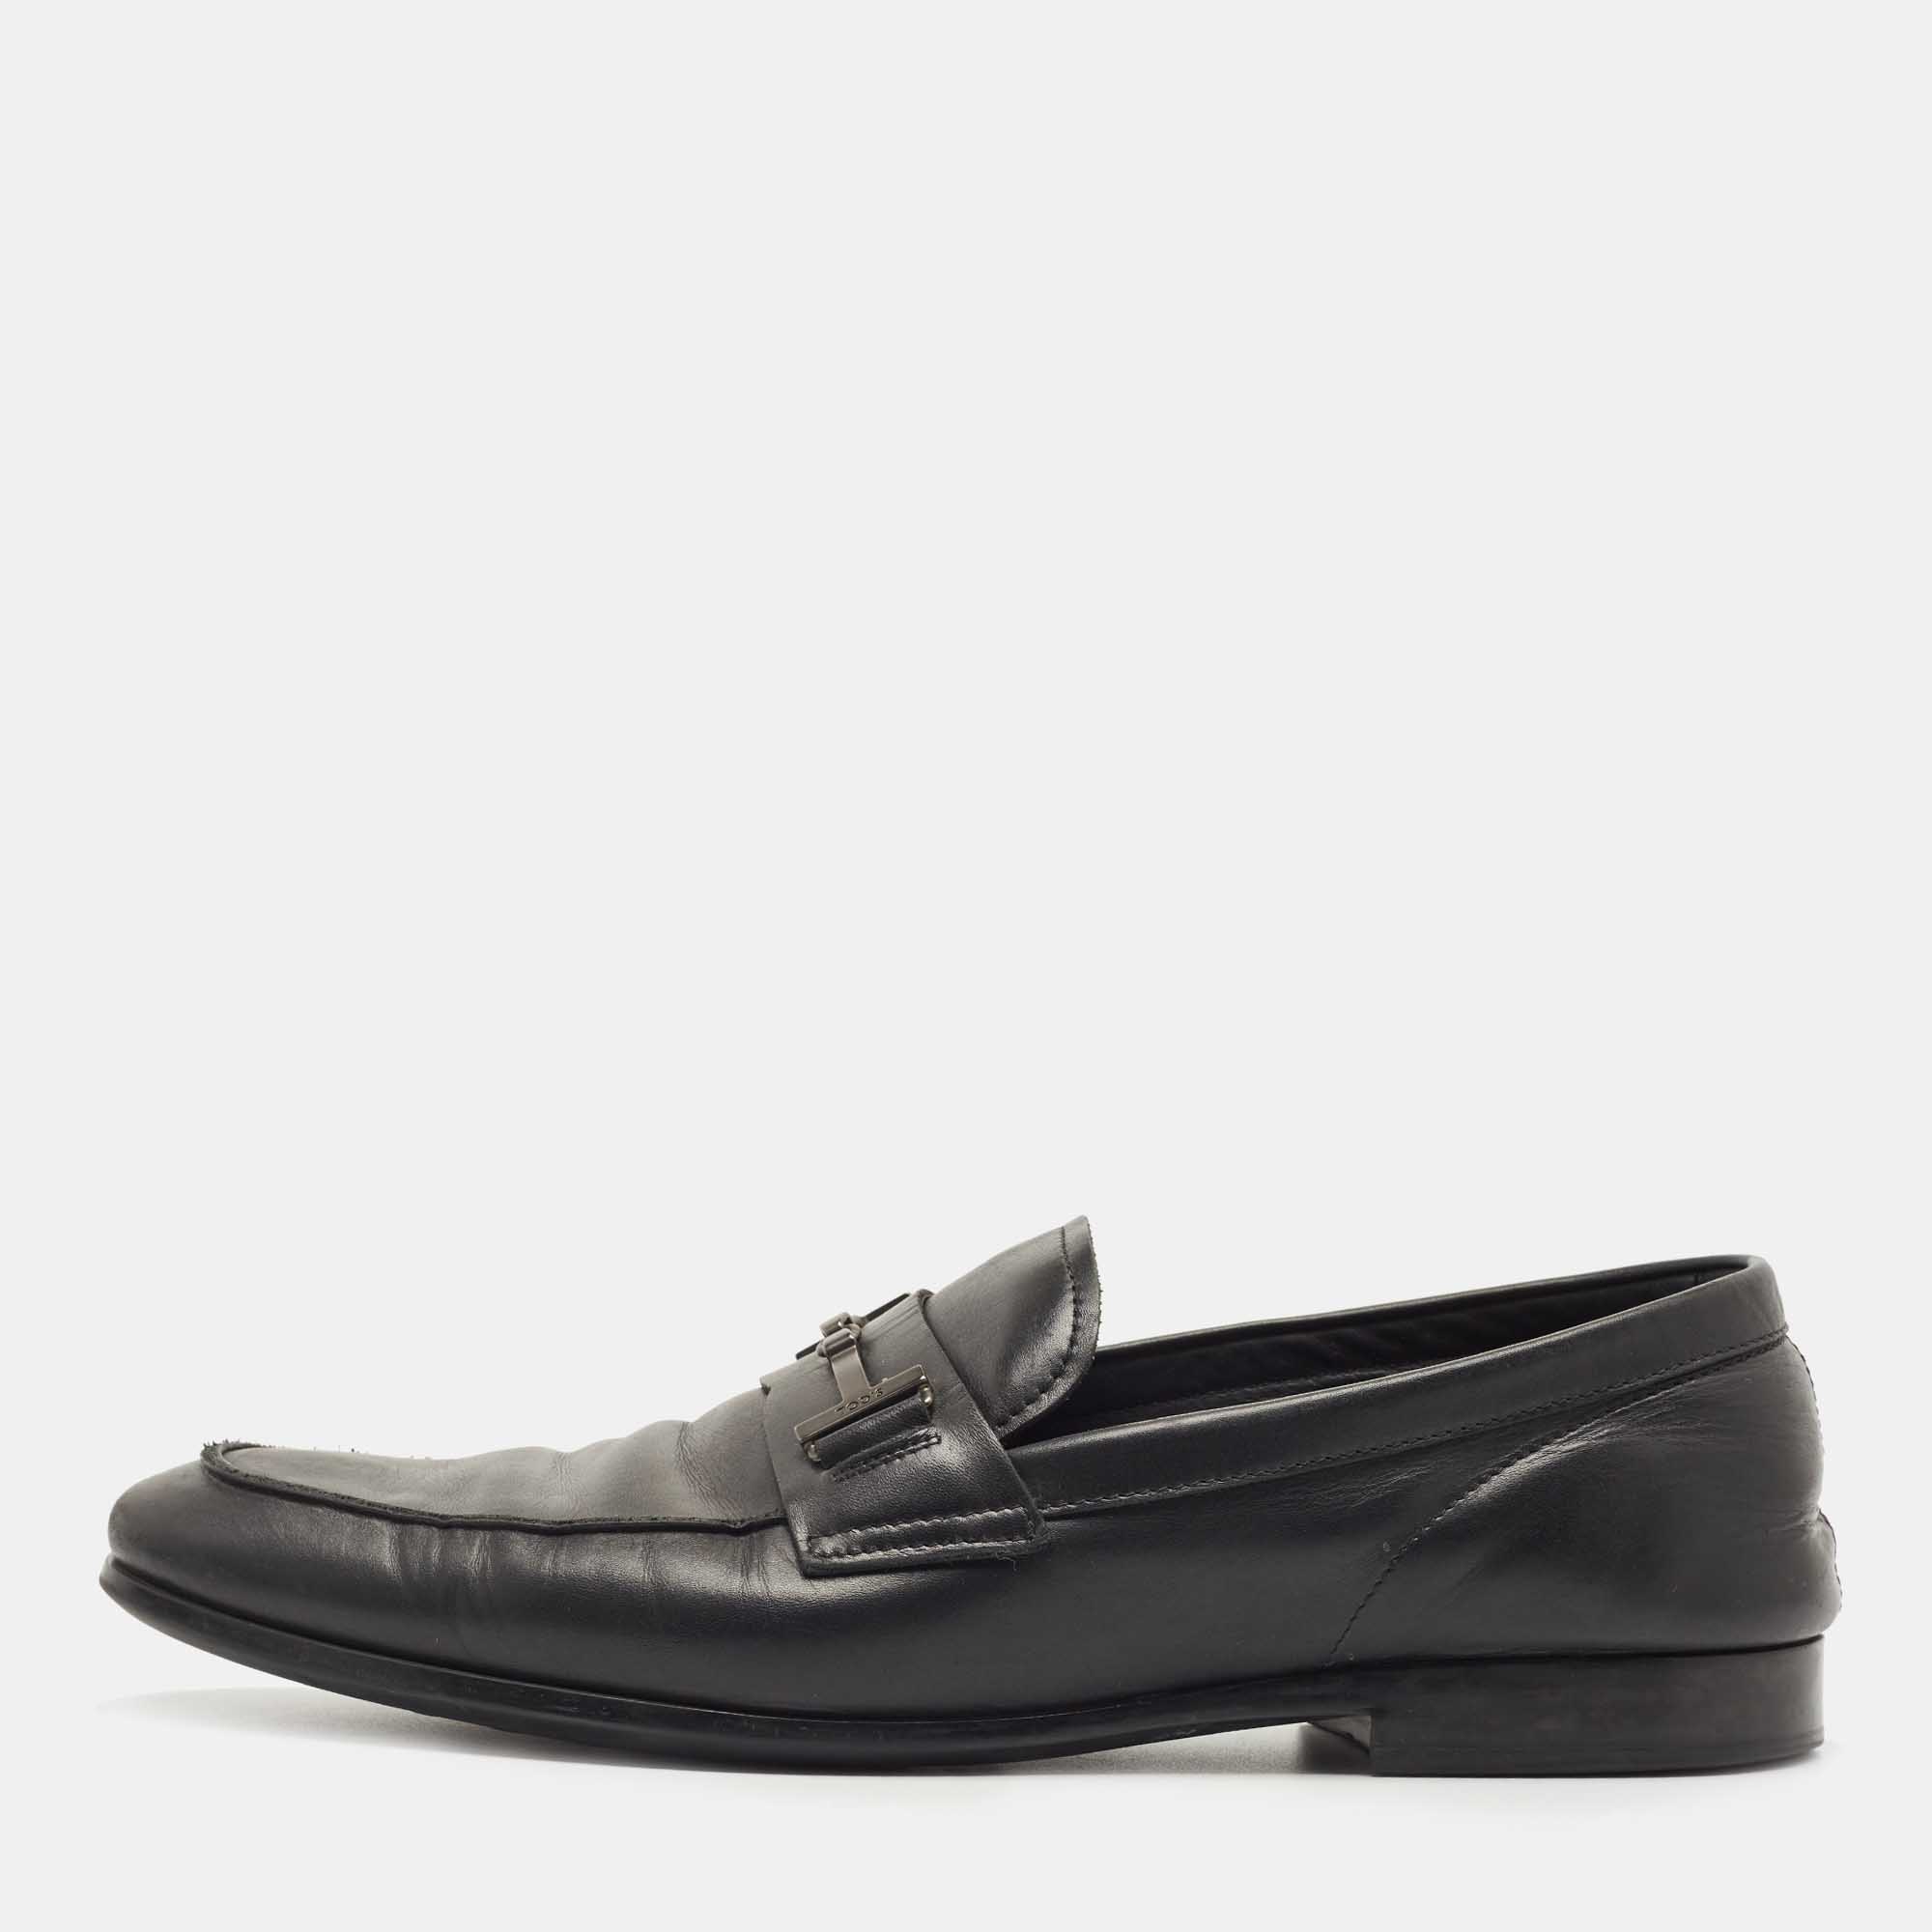 Pre-owned Tod's Black Leather Slip On Loafers Size 44.5